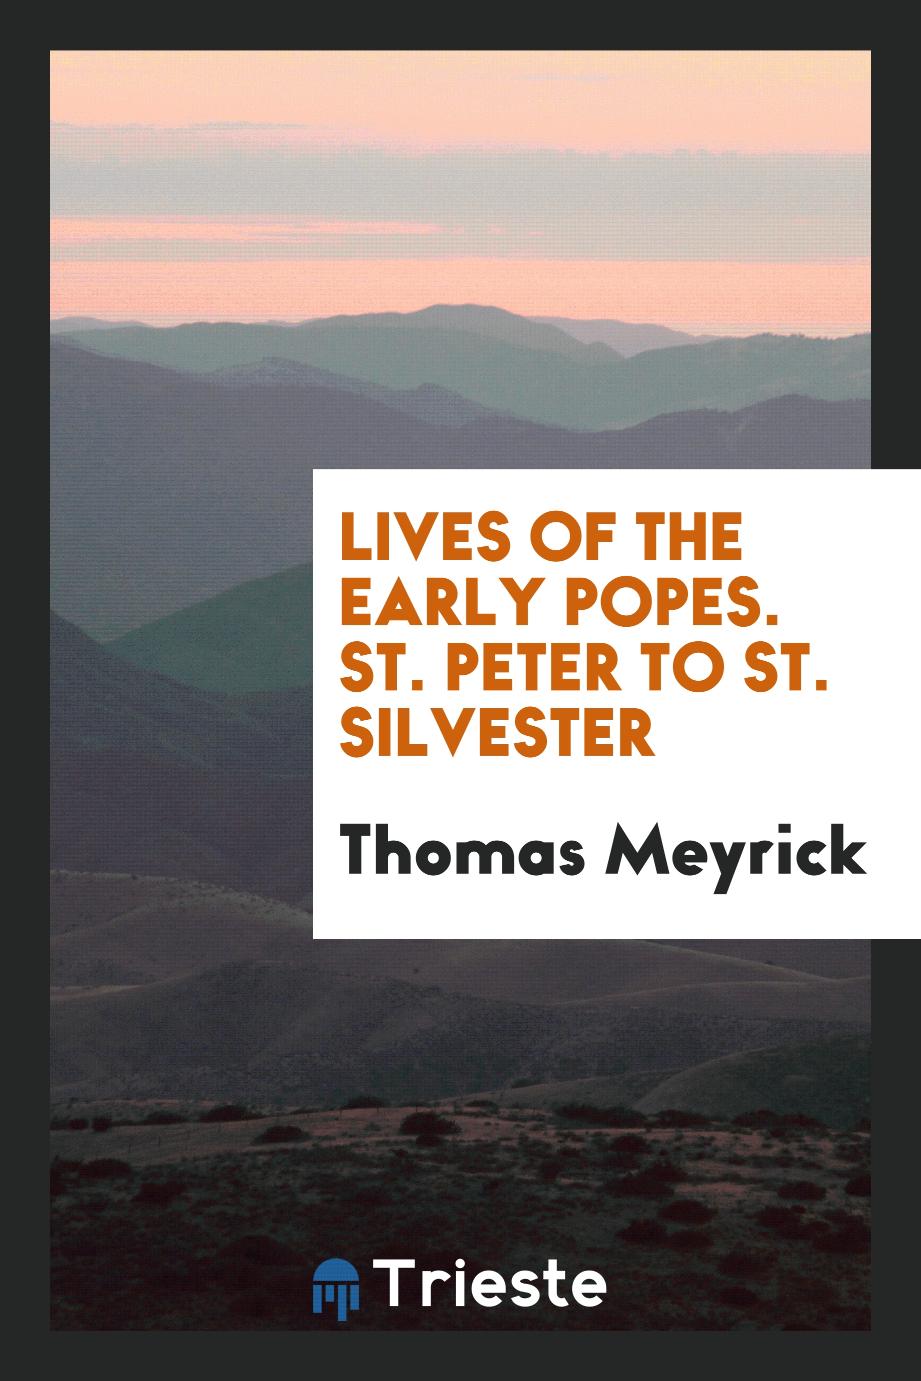 Lives of the Early Popes. St. Peter to St. Silvester